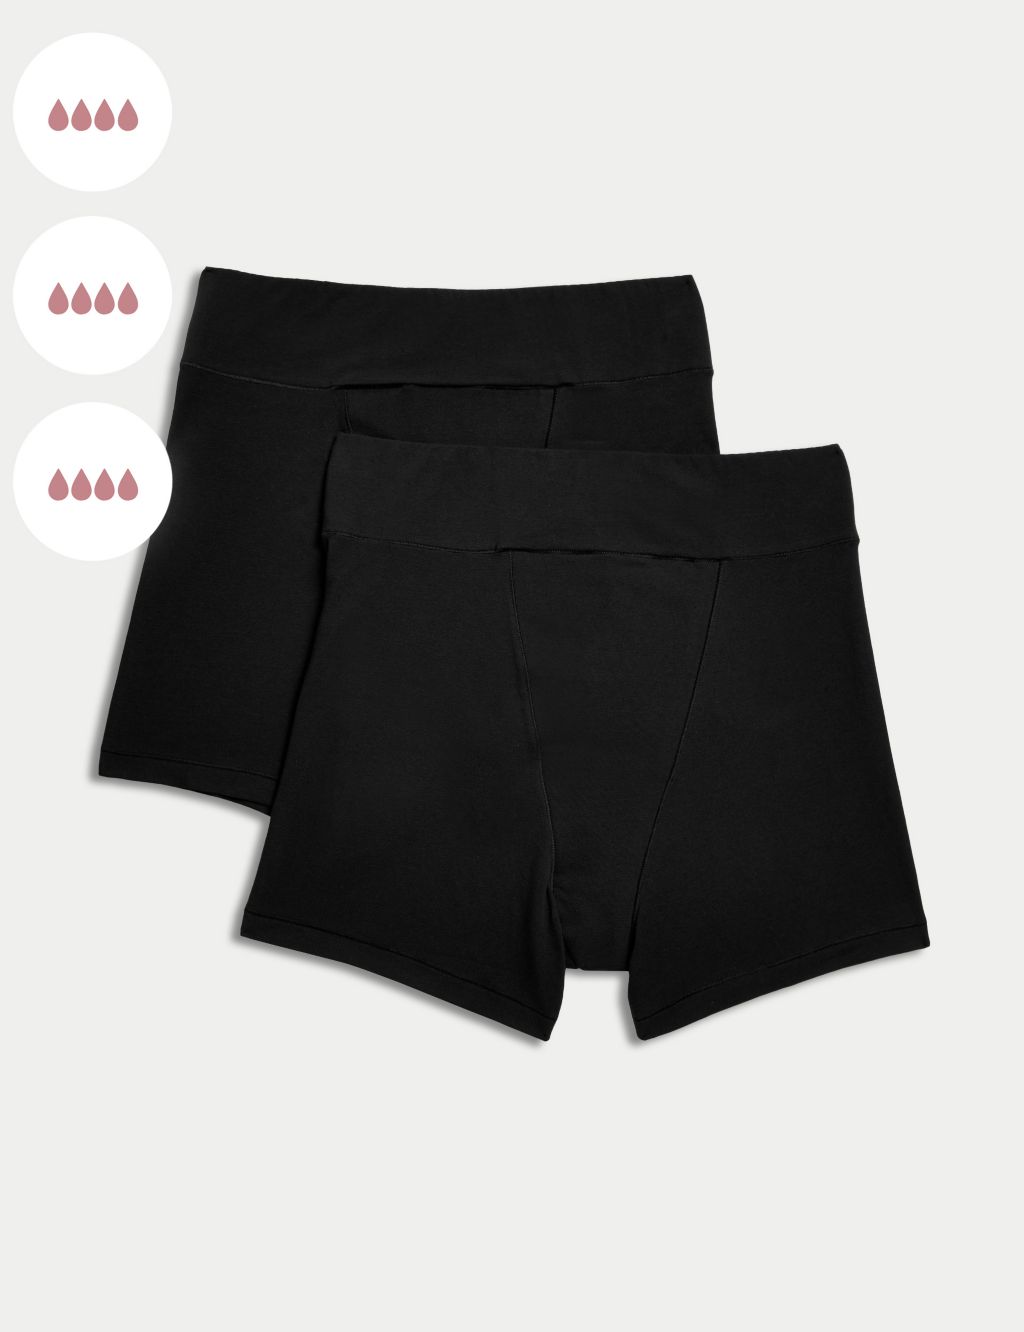 Knicked - Our Sleep Shorts are super heavy absorbency and are